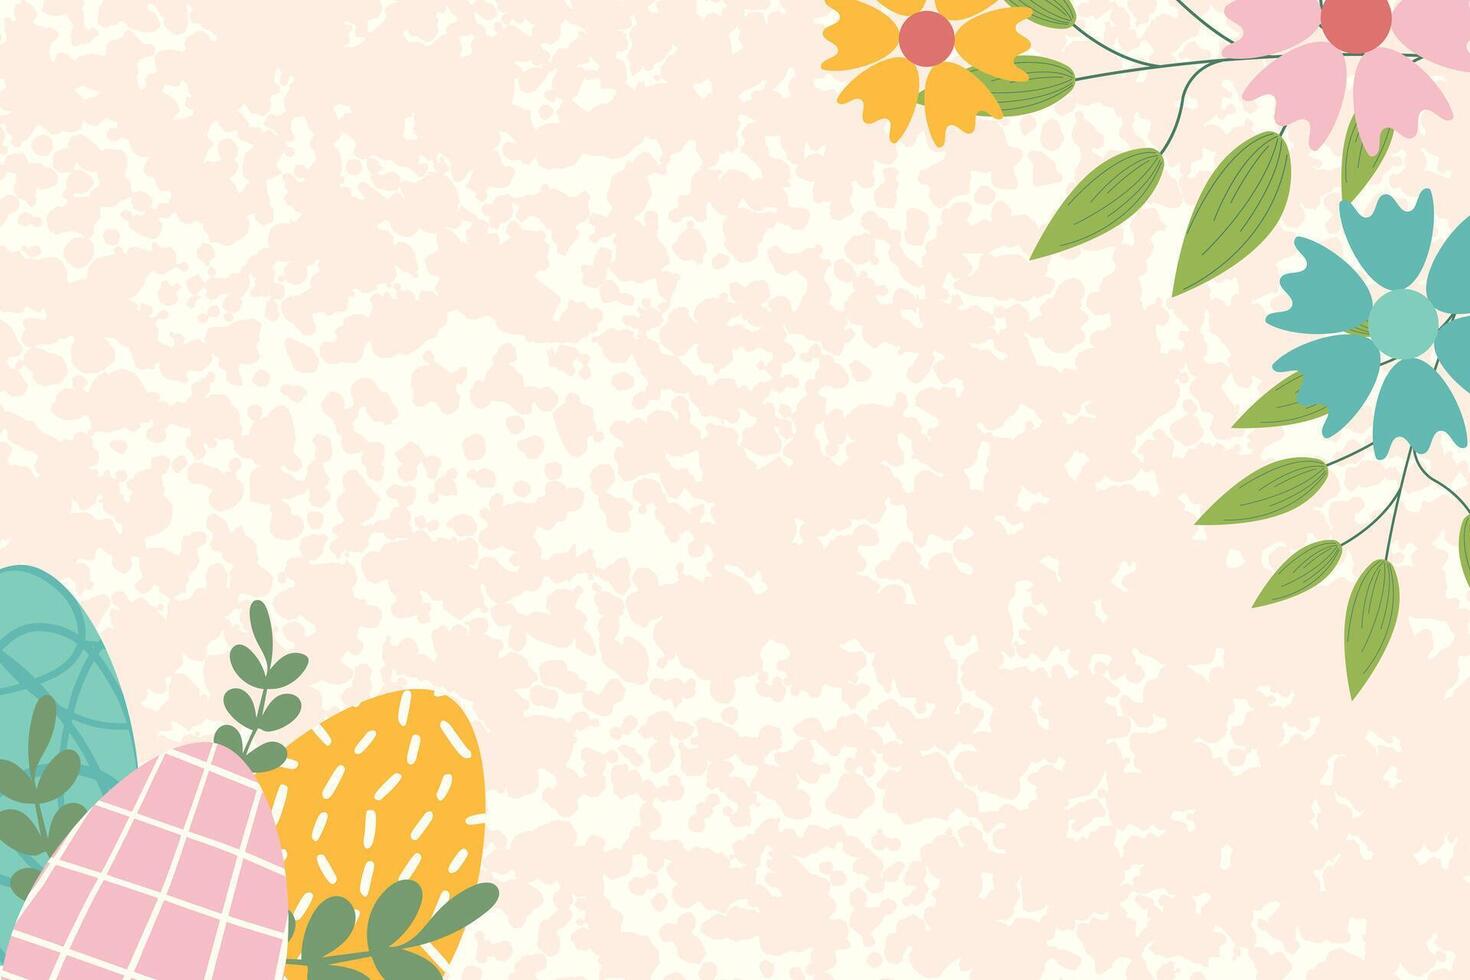 Easter background for banner, template. Trendy Easter design with flowers, eggs, in pastel colors with texture on background. Flat illustration. vector